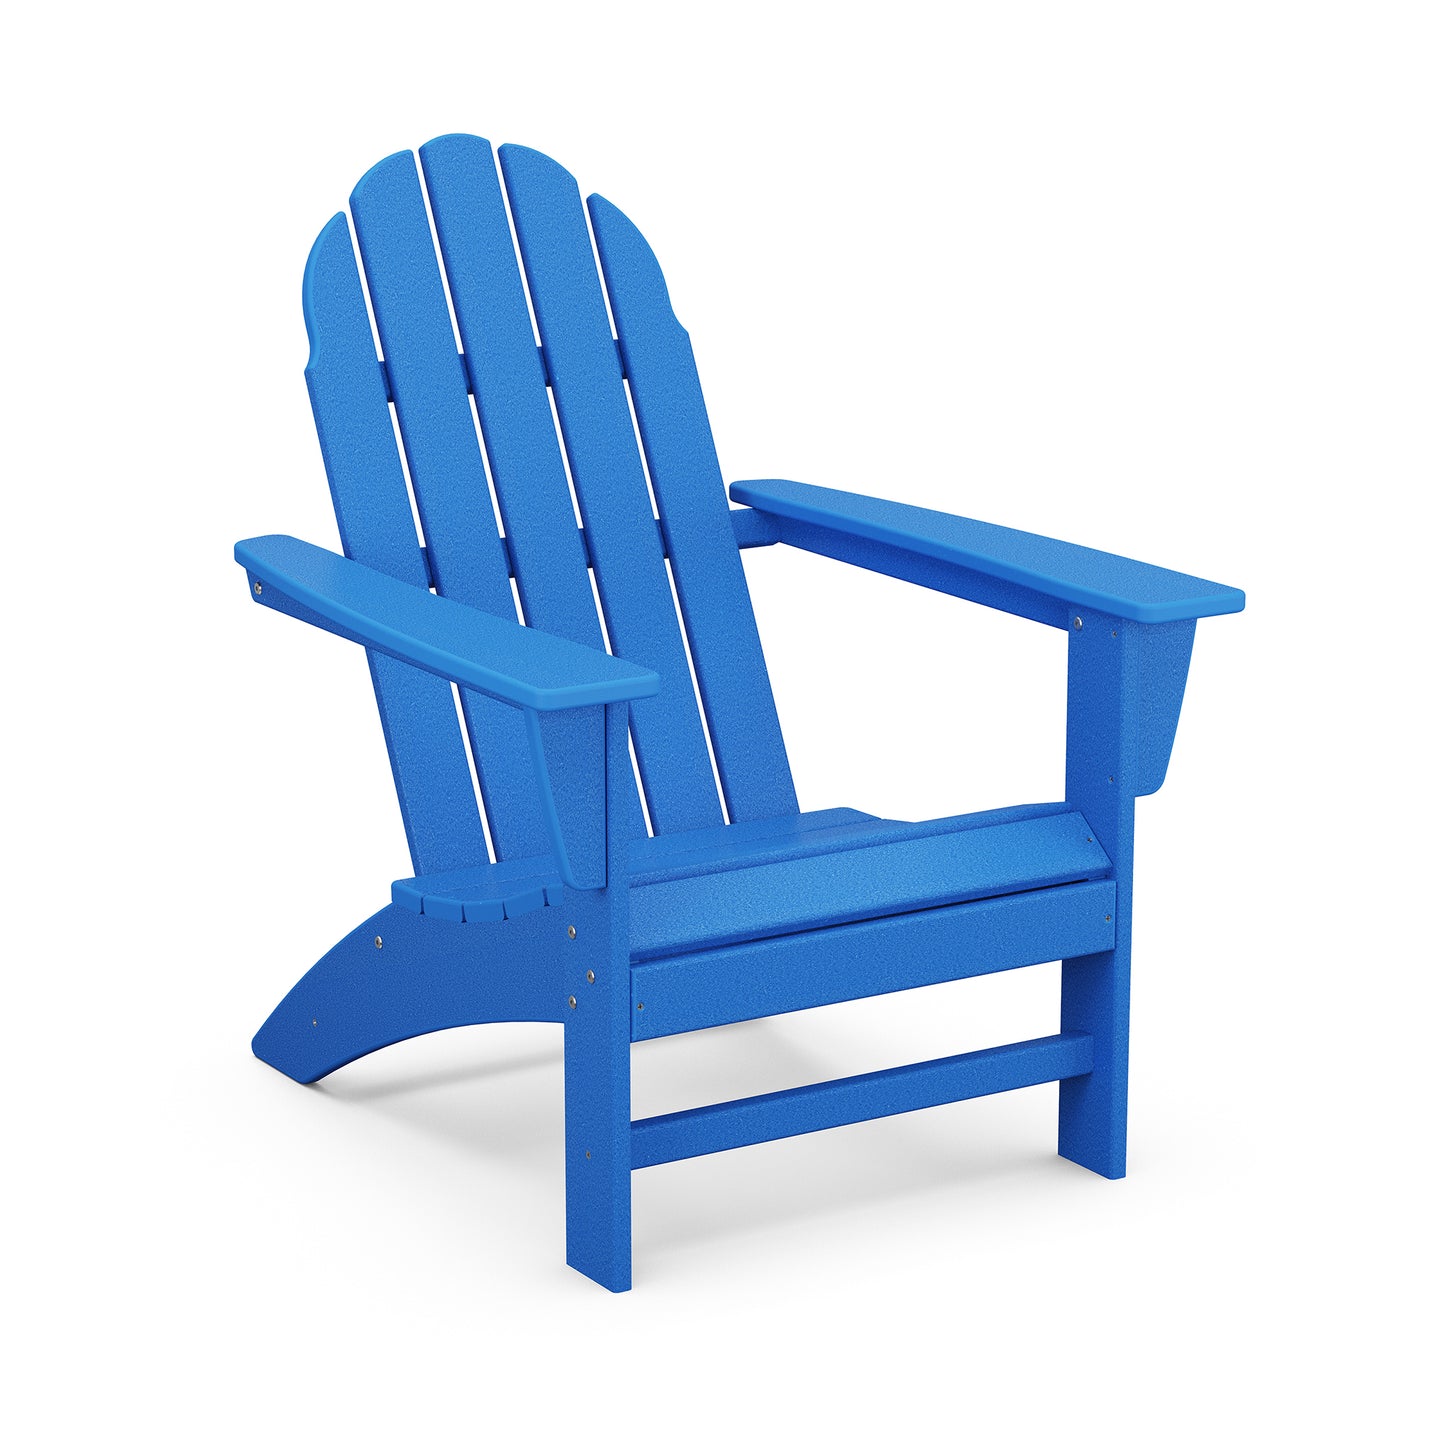 A bright blue POLYWOOD® Vineyard Adirondack Chair isolated on a white background. The chair features a tall slated back and wide armrests, typical of this style.